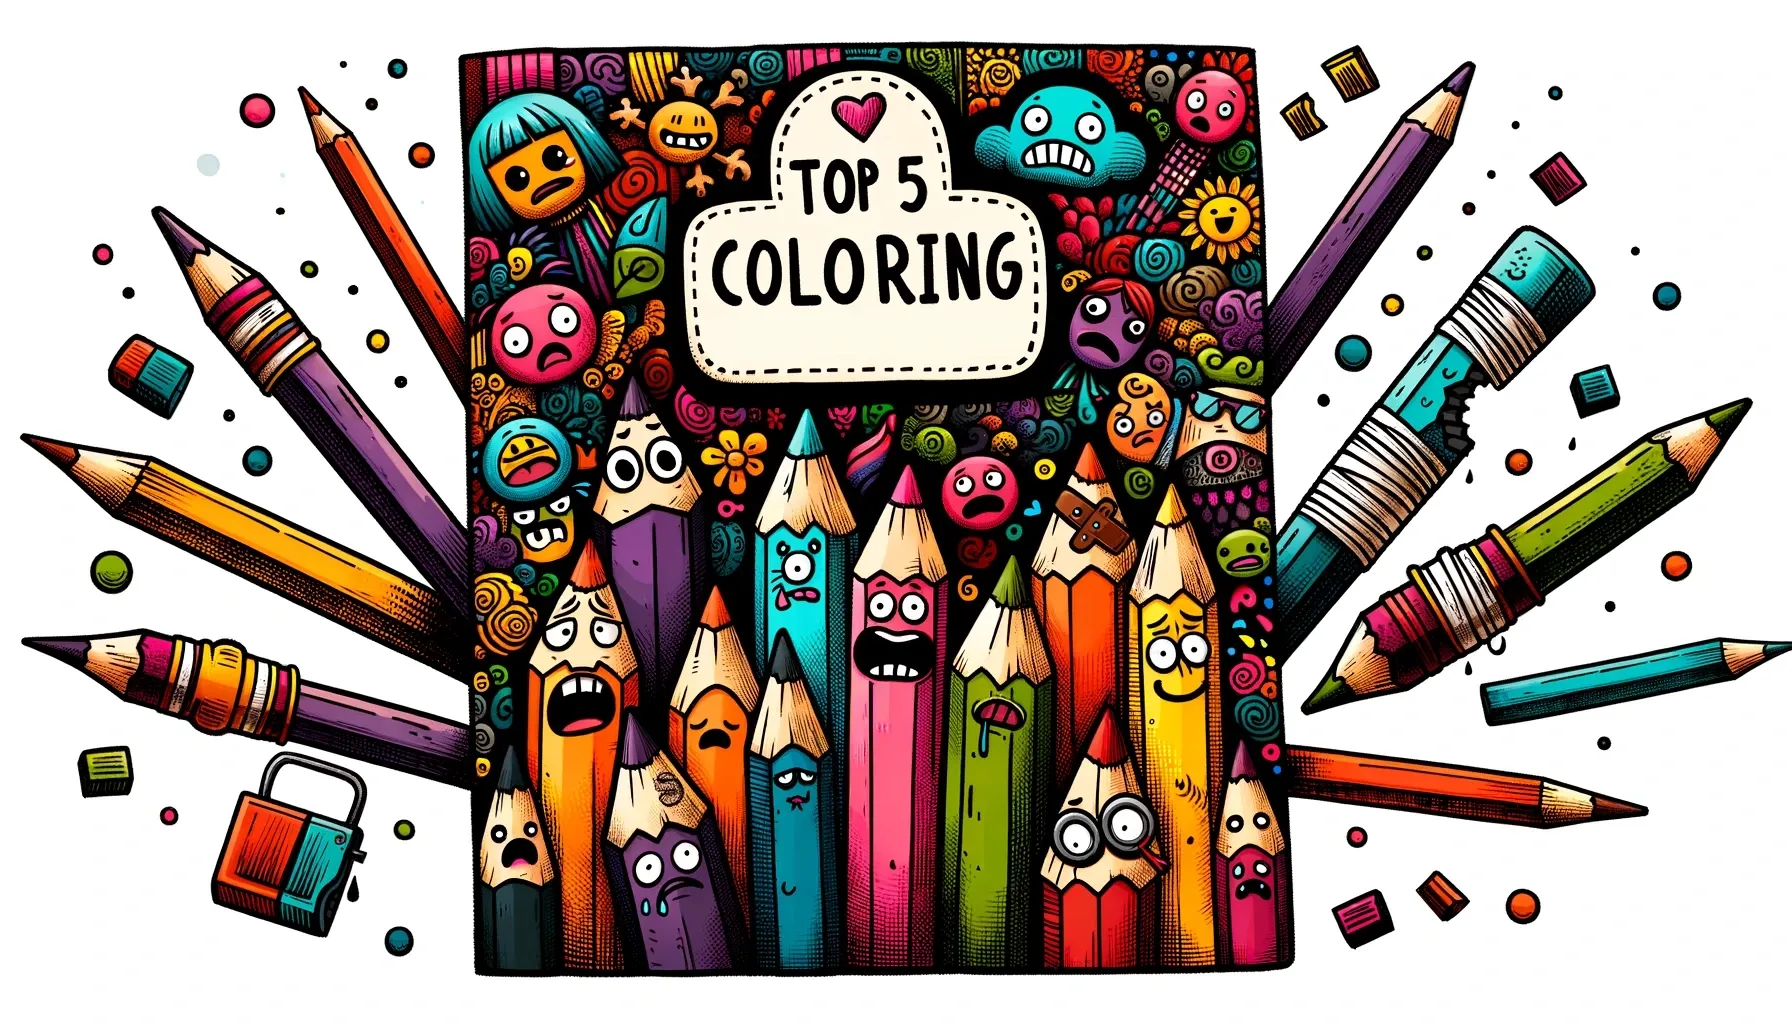 Top 5 Coloring Pencils for Stressed Out Adults